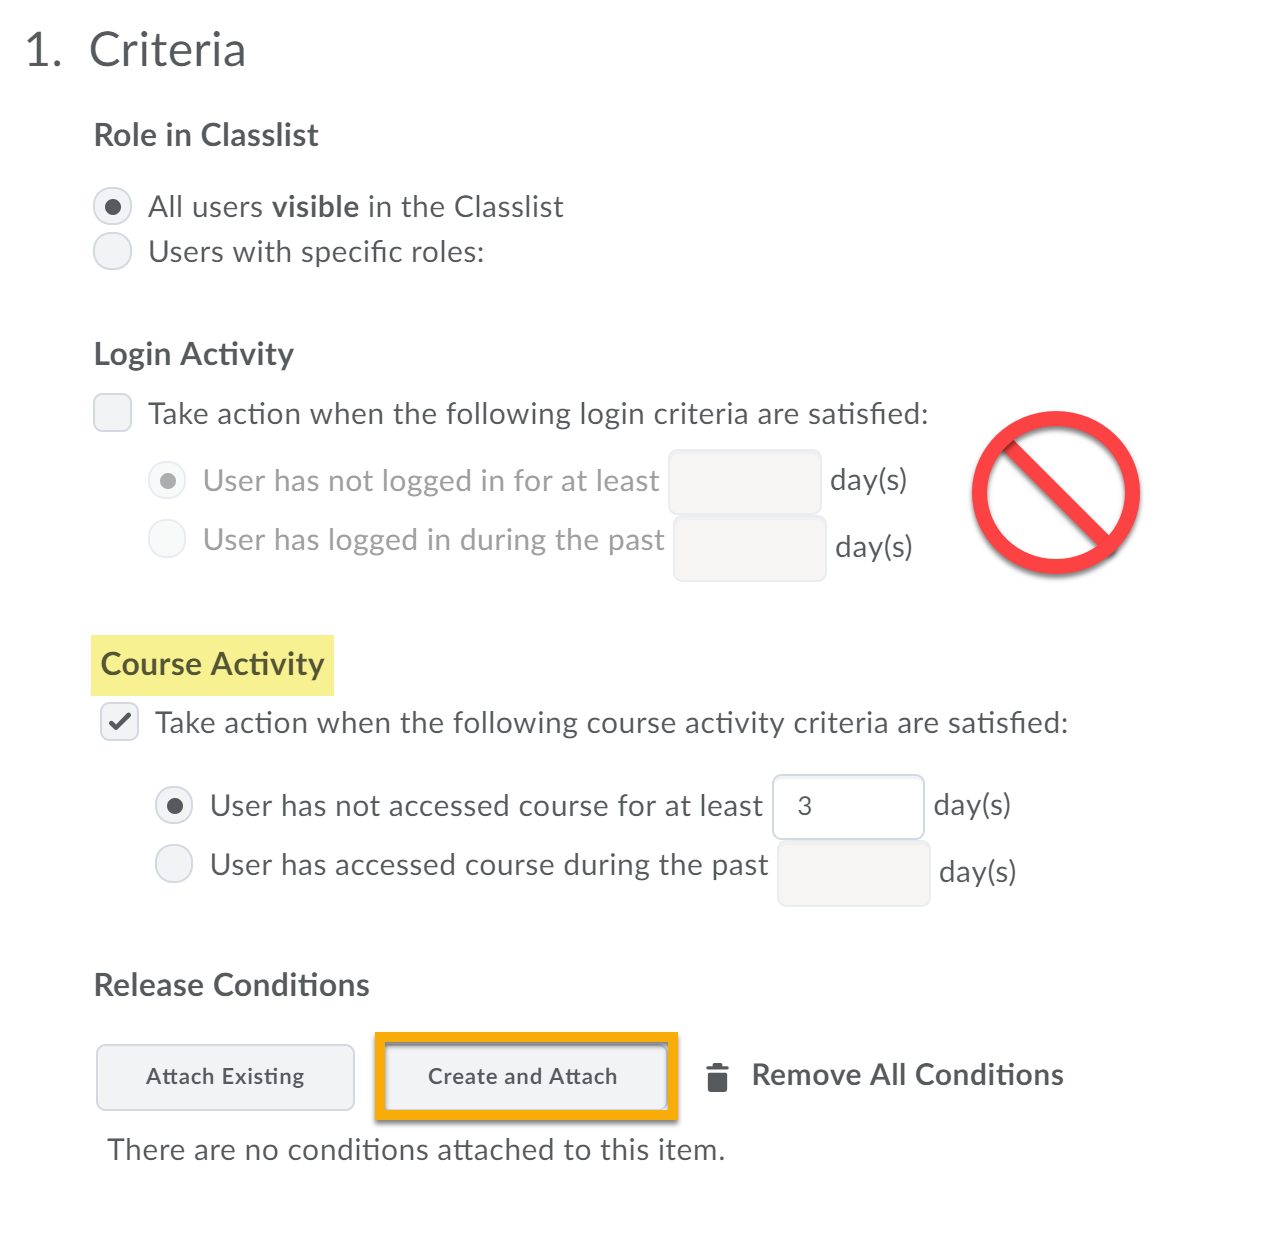 Login Activity has a No symbol to discourage use. Course Activity is highlighted with 3 days as an example. Release Conditions has the Create and Attach button highlighted.